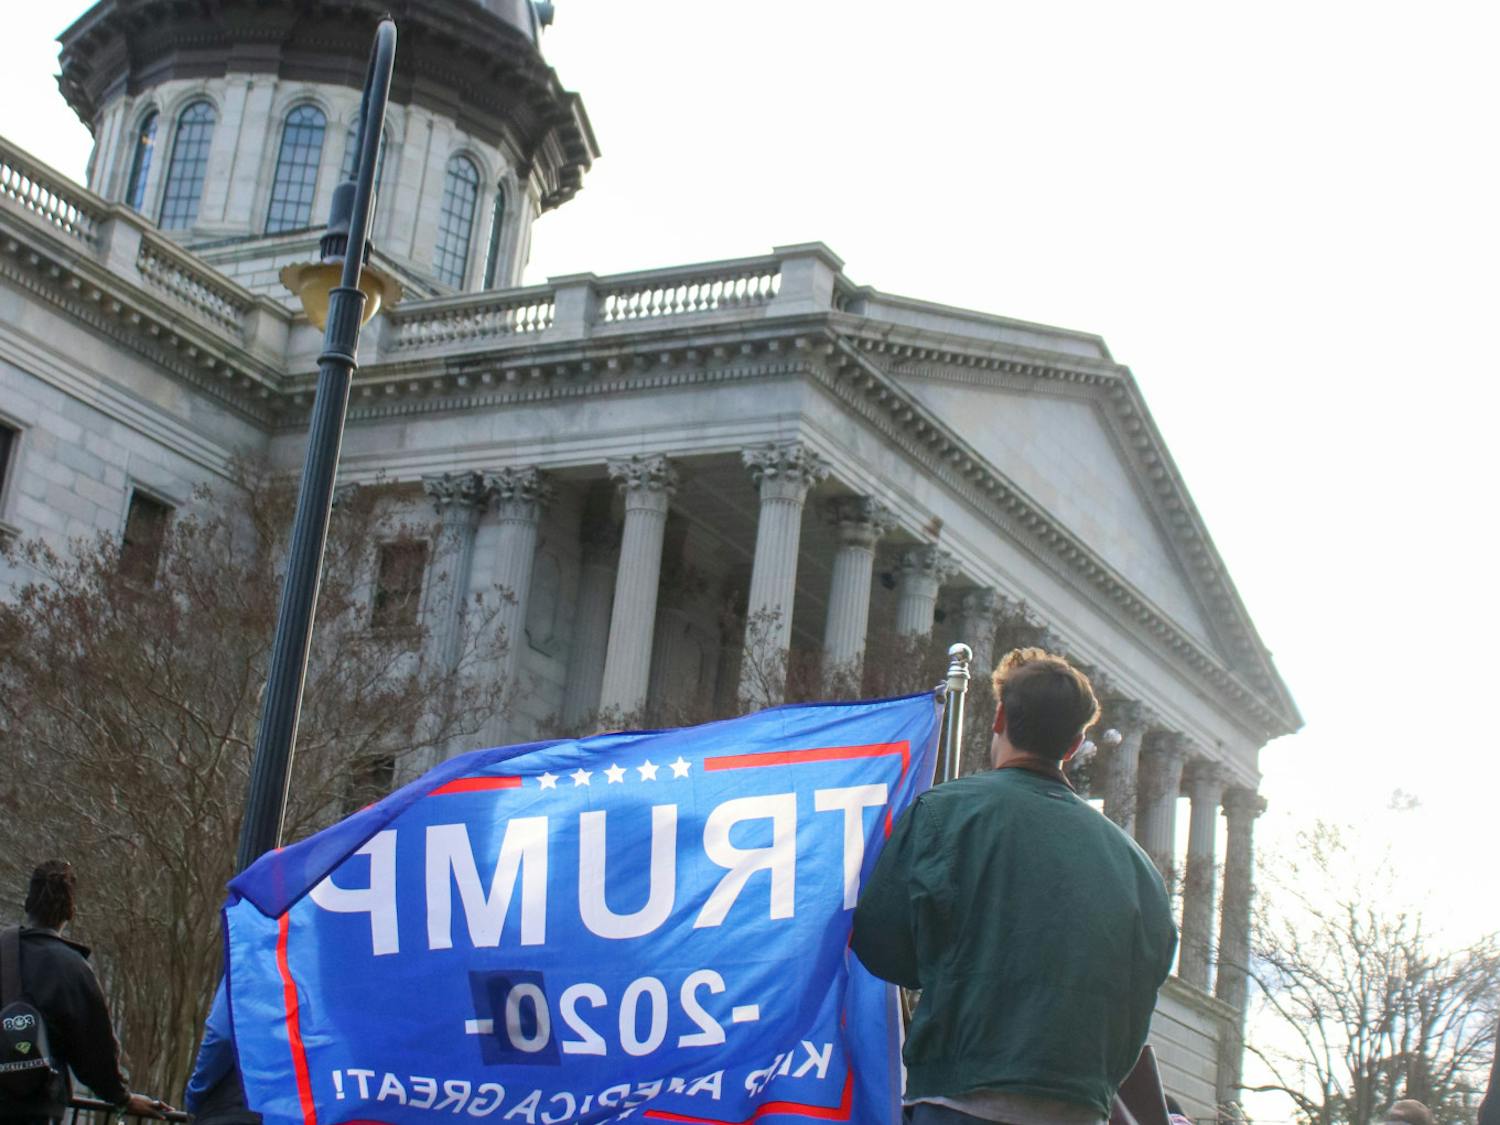 While hundreds of people made it into the Statehouse for former President Donald Trump's private campaign event, many remained gathered on the lawn on Jan. 28, 2023. Chants of "U-S-A" could be heard at different times of the day, as some attendees demonstrated their support for Trump's 2024 campaign.&nbsp;